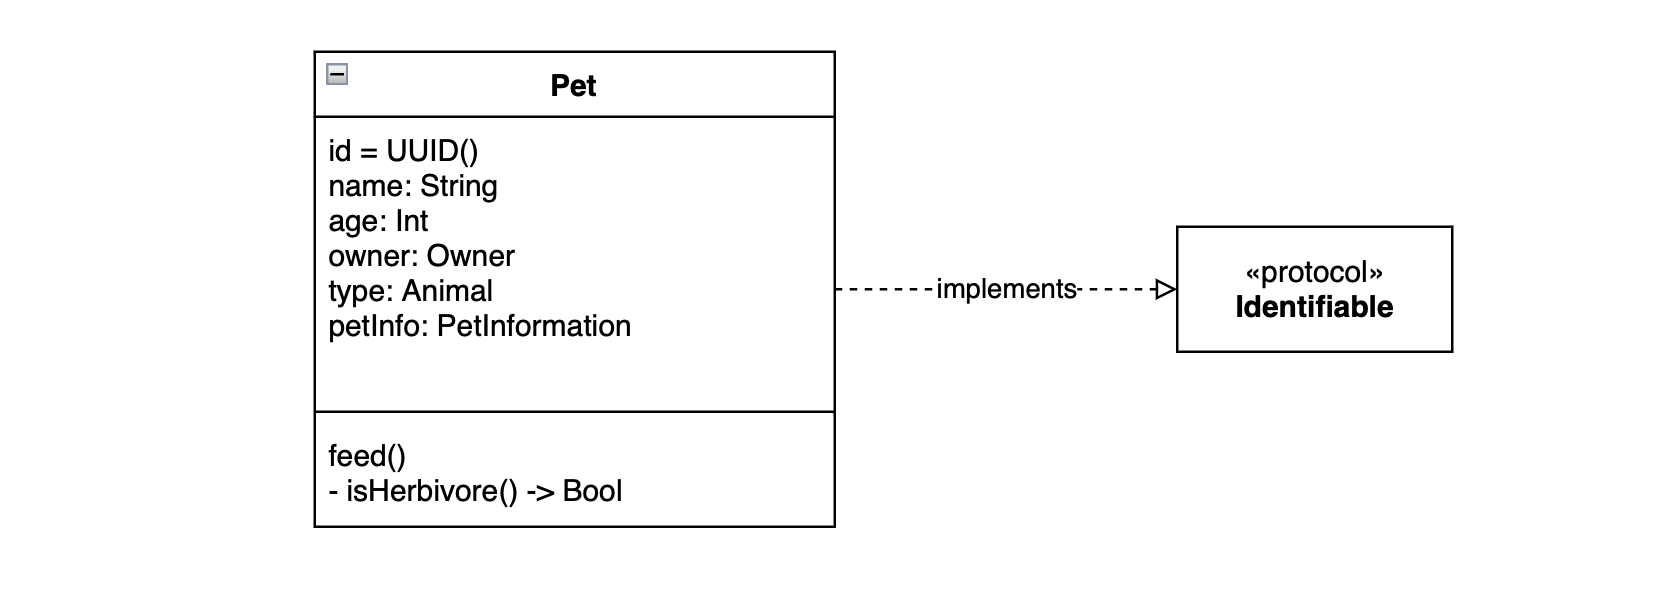 A class diagram showing the Pet struct and conformance to Identifiable with an implementation relationship